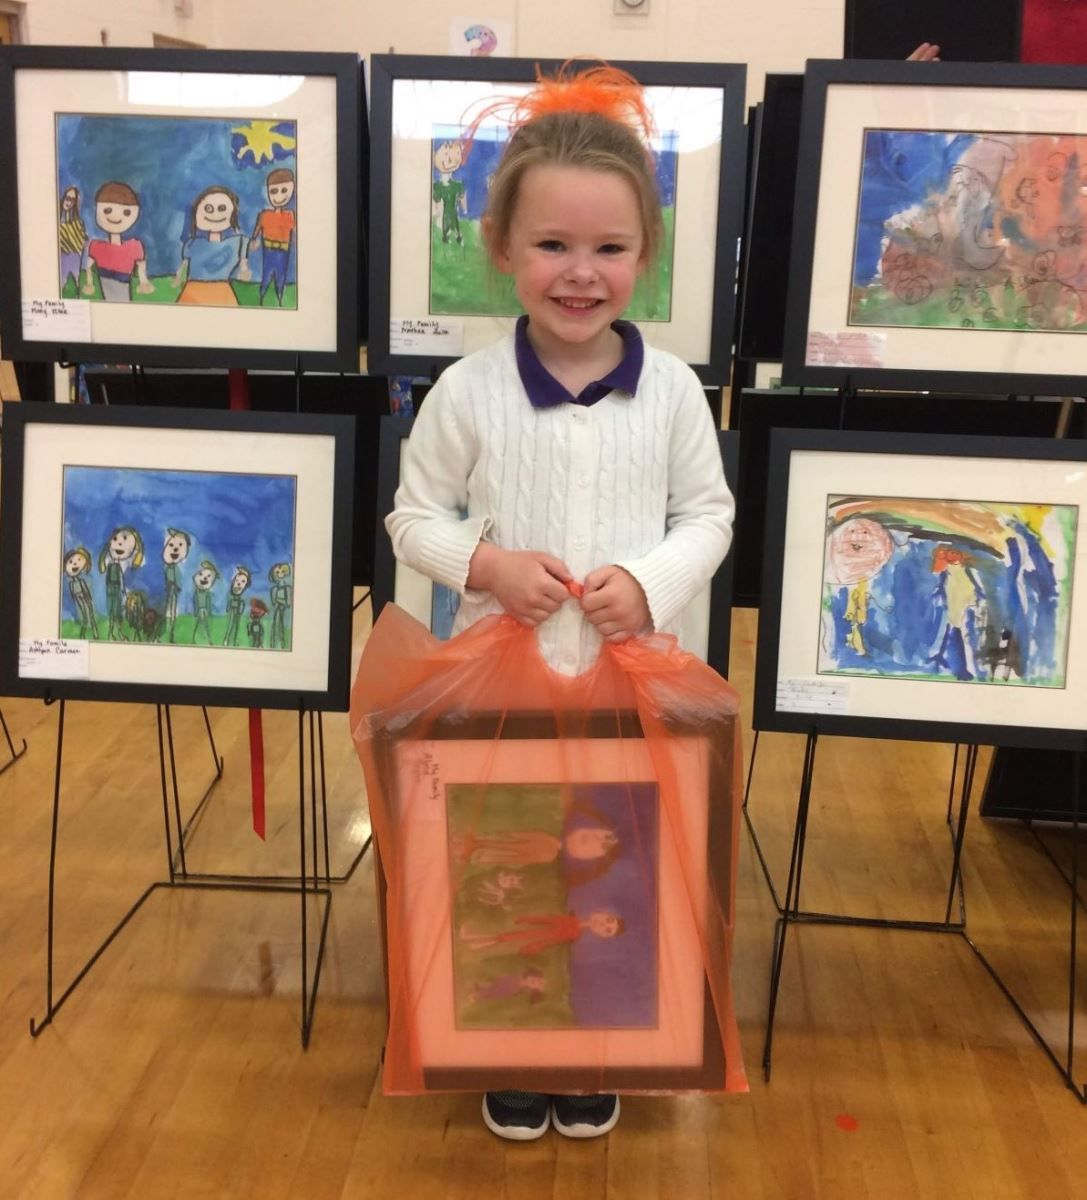 a little girl is holding a framed picture in front of a display of children 's artwork